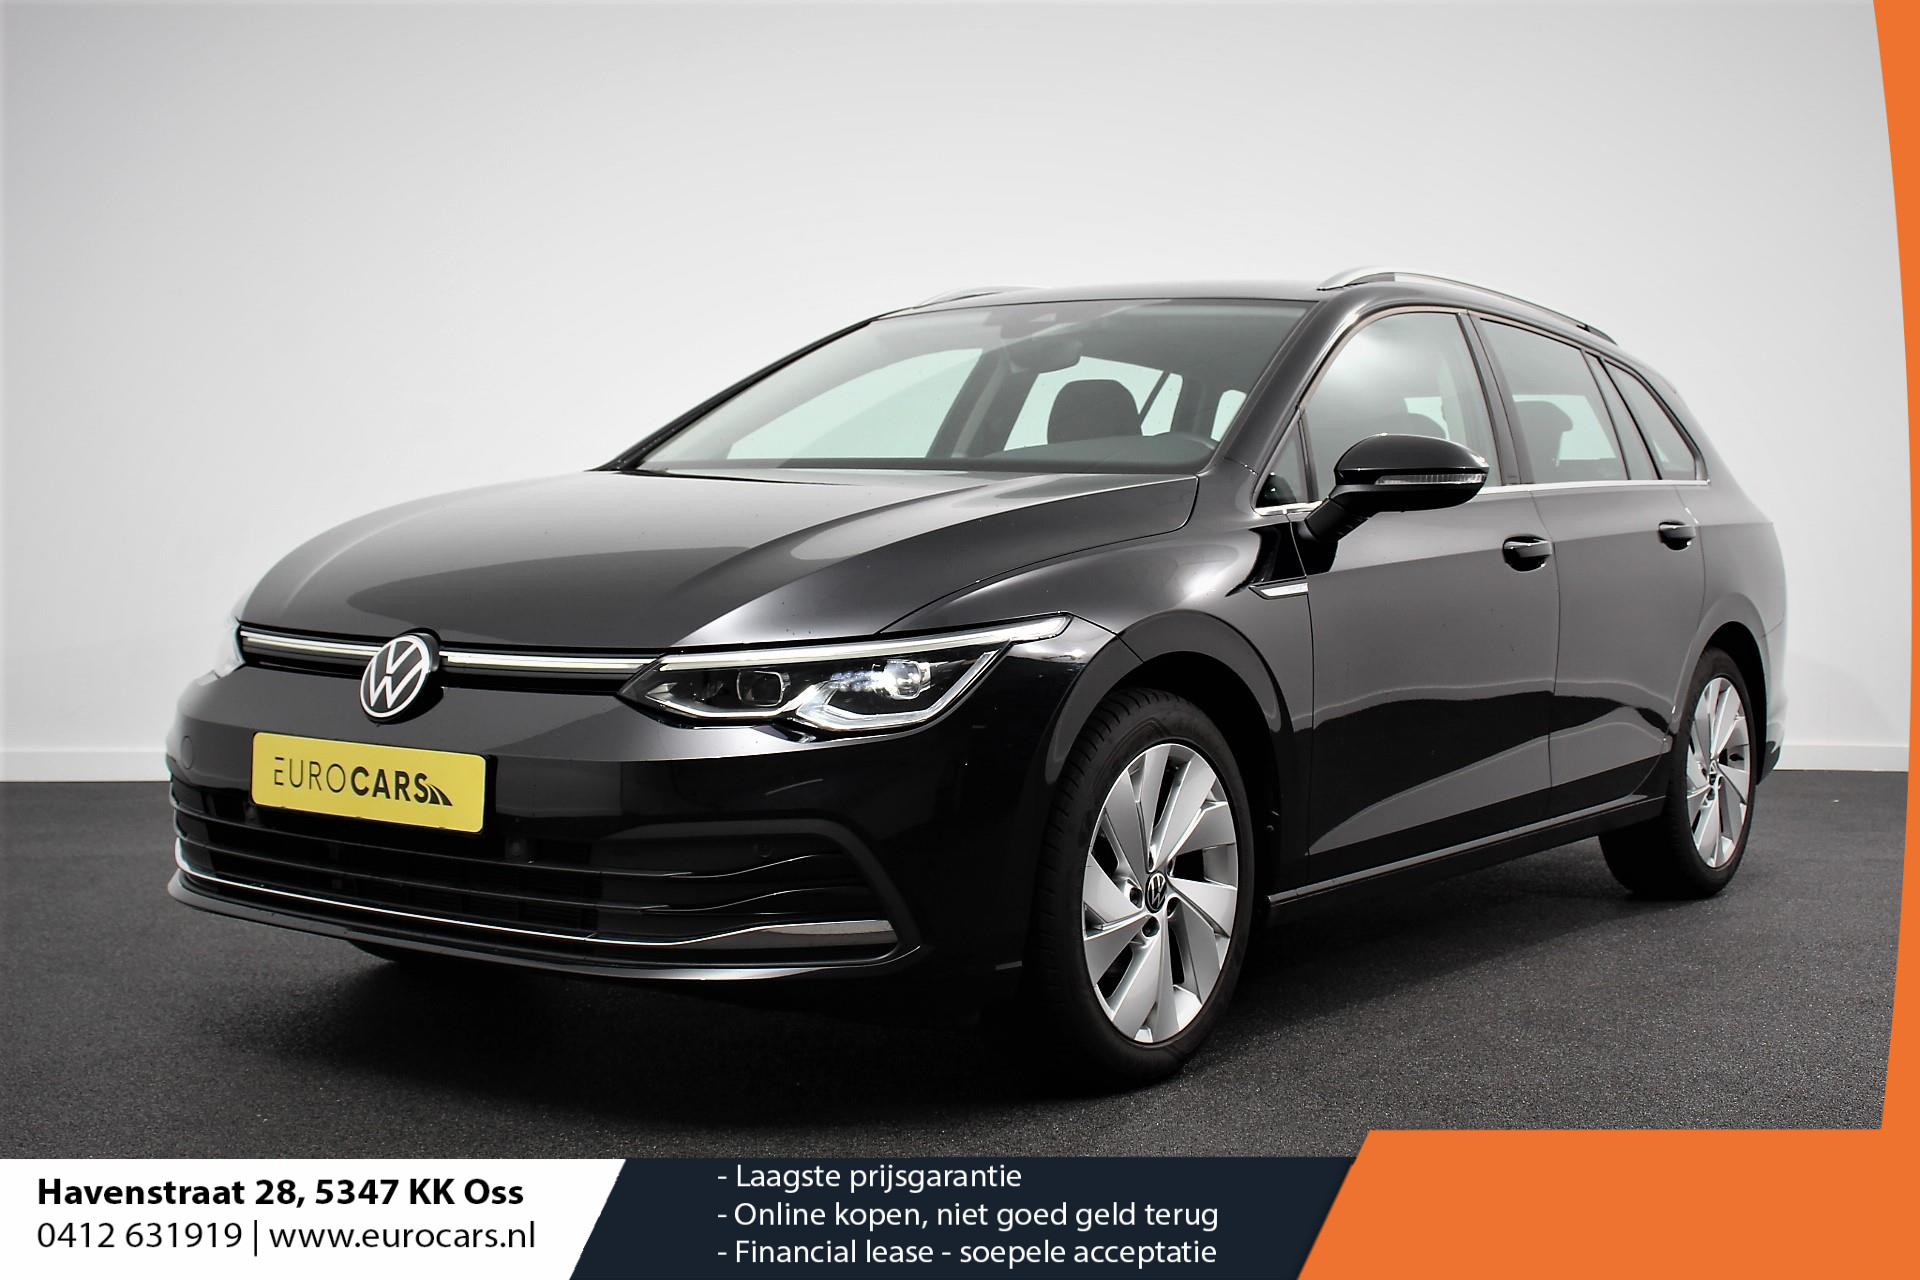 Volkswagen Golf Variant 1.5 eTSI 150pk DSG Style | Navigatie | Wireless App Connect / Apple Carplay / Android Auto | Climate Control | Virtual Cockpit | Adaptive Cruise Control | Led